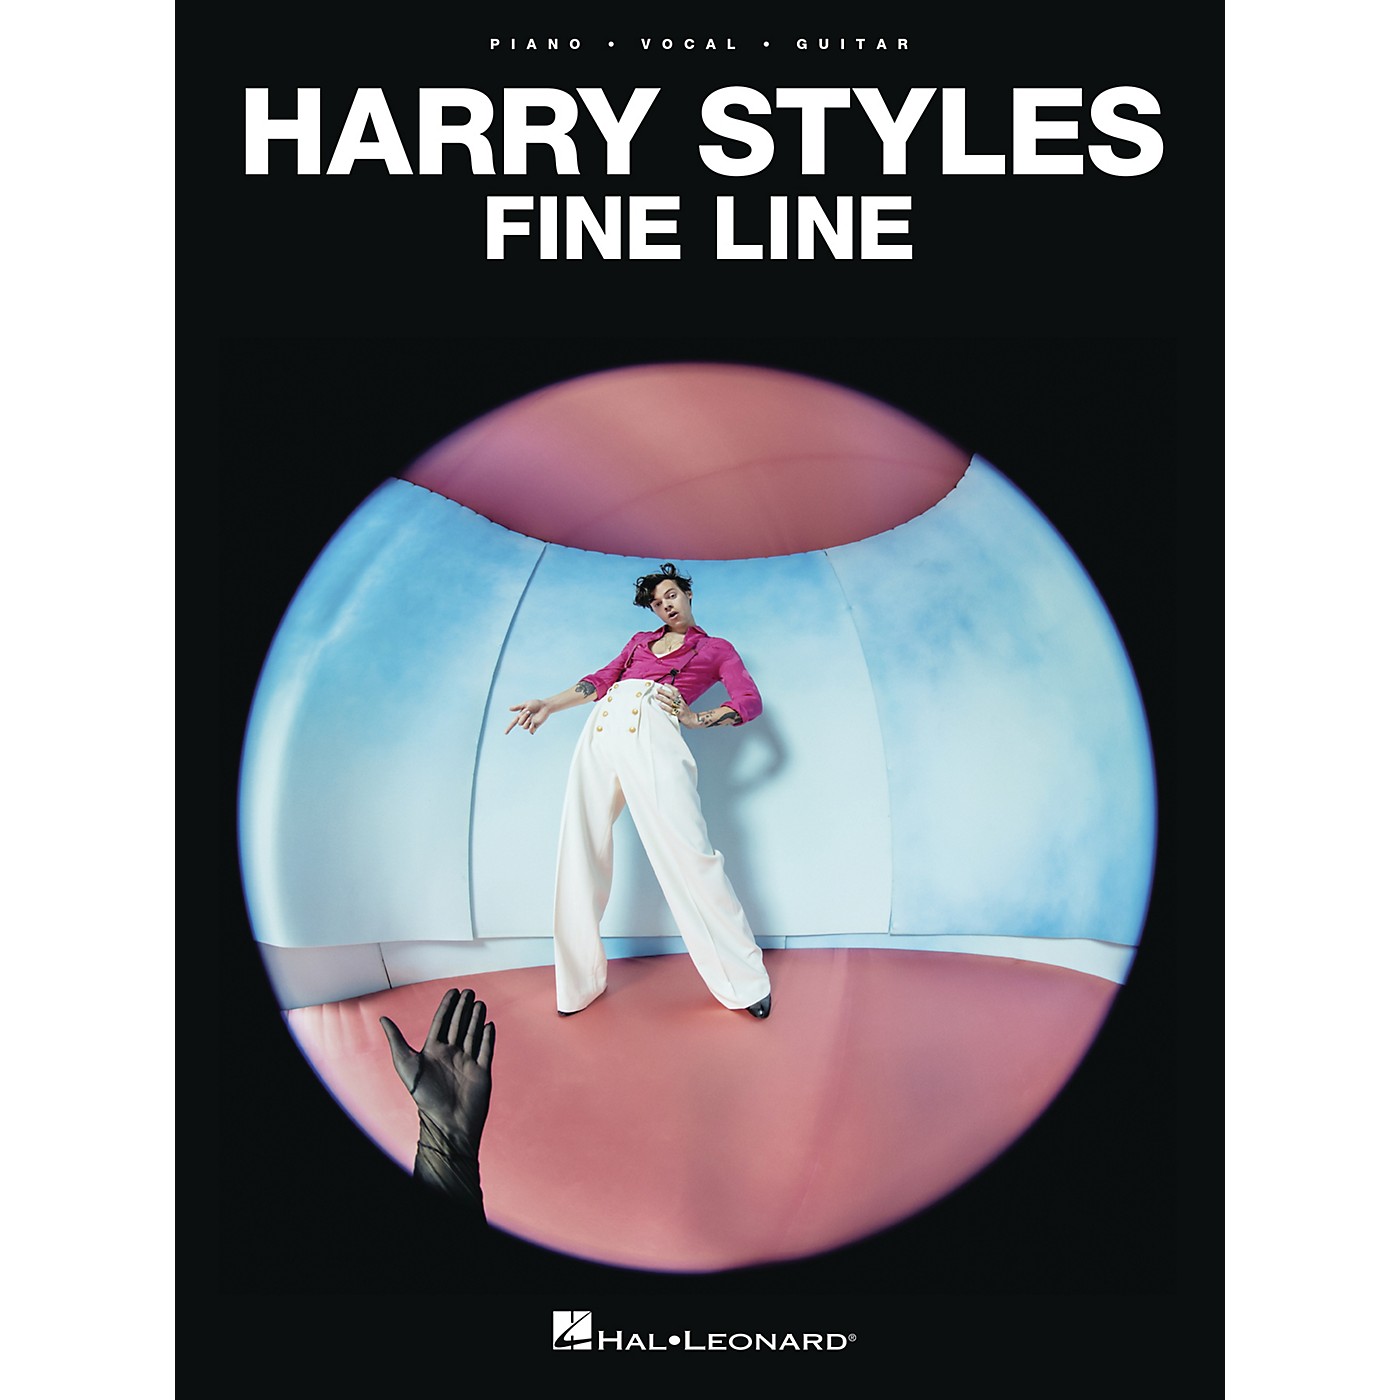 Hal Leonard Harry Styles - Fine Line Piano/Vocal/Guitar Songbook thumbnail